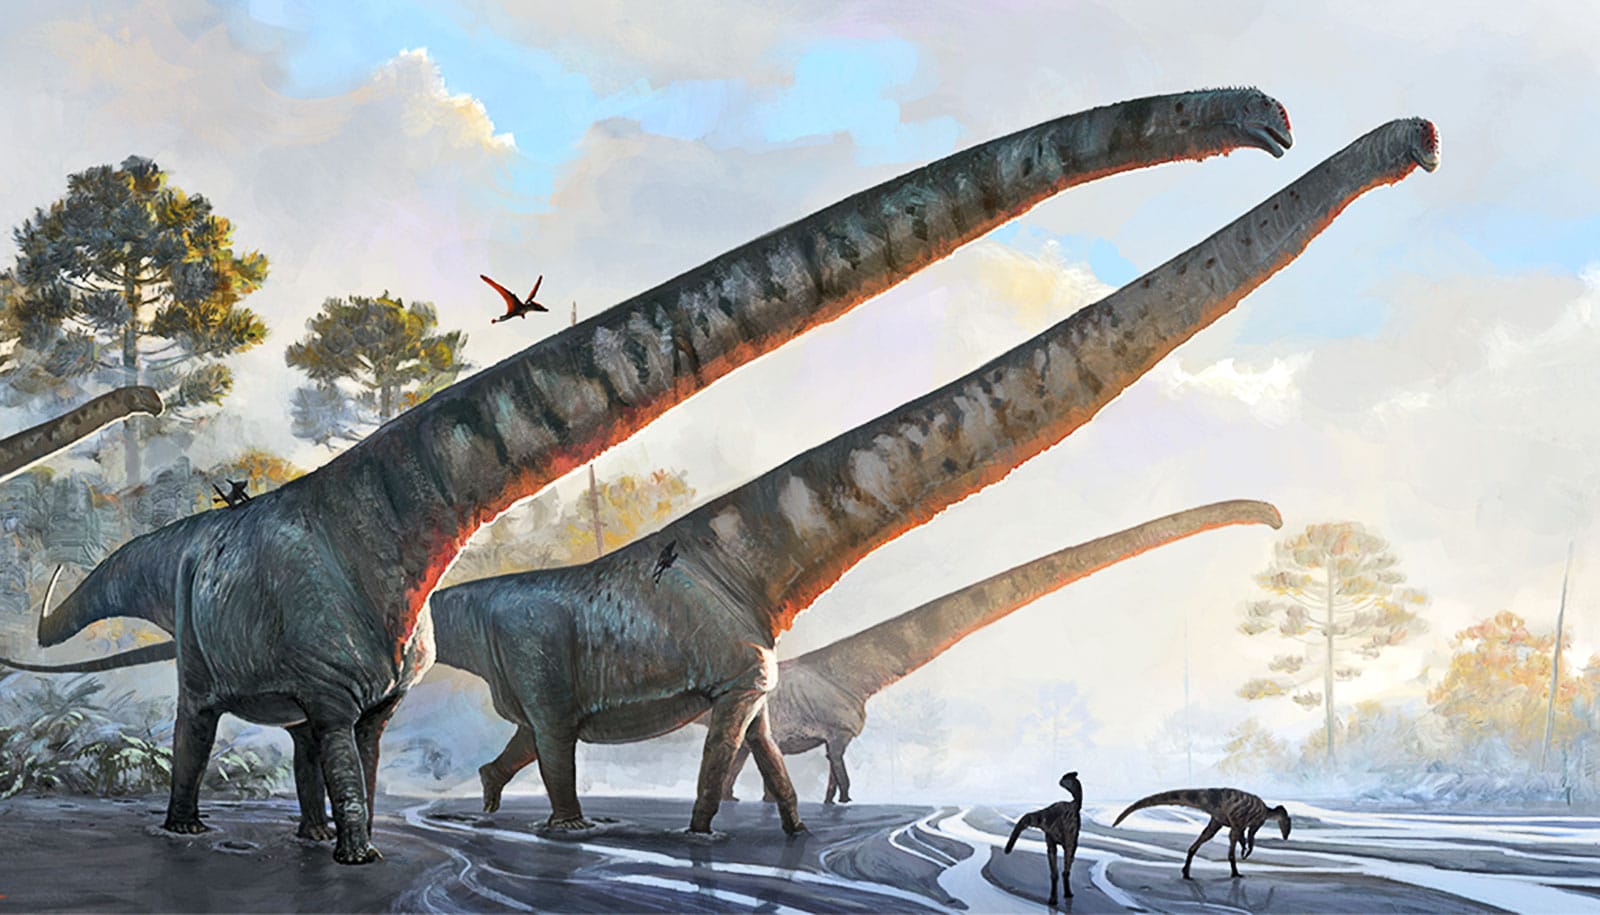 Several sauropods with extraordinarily long necks stand at the edge of a river.